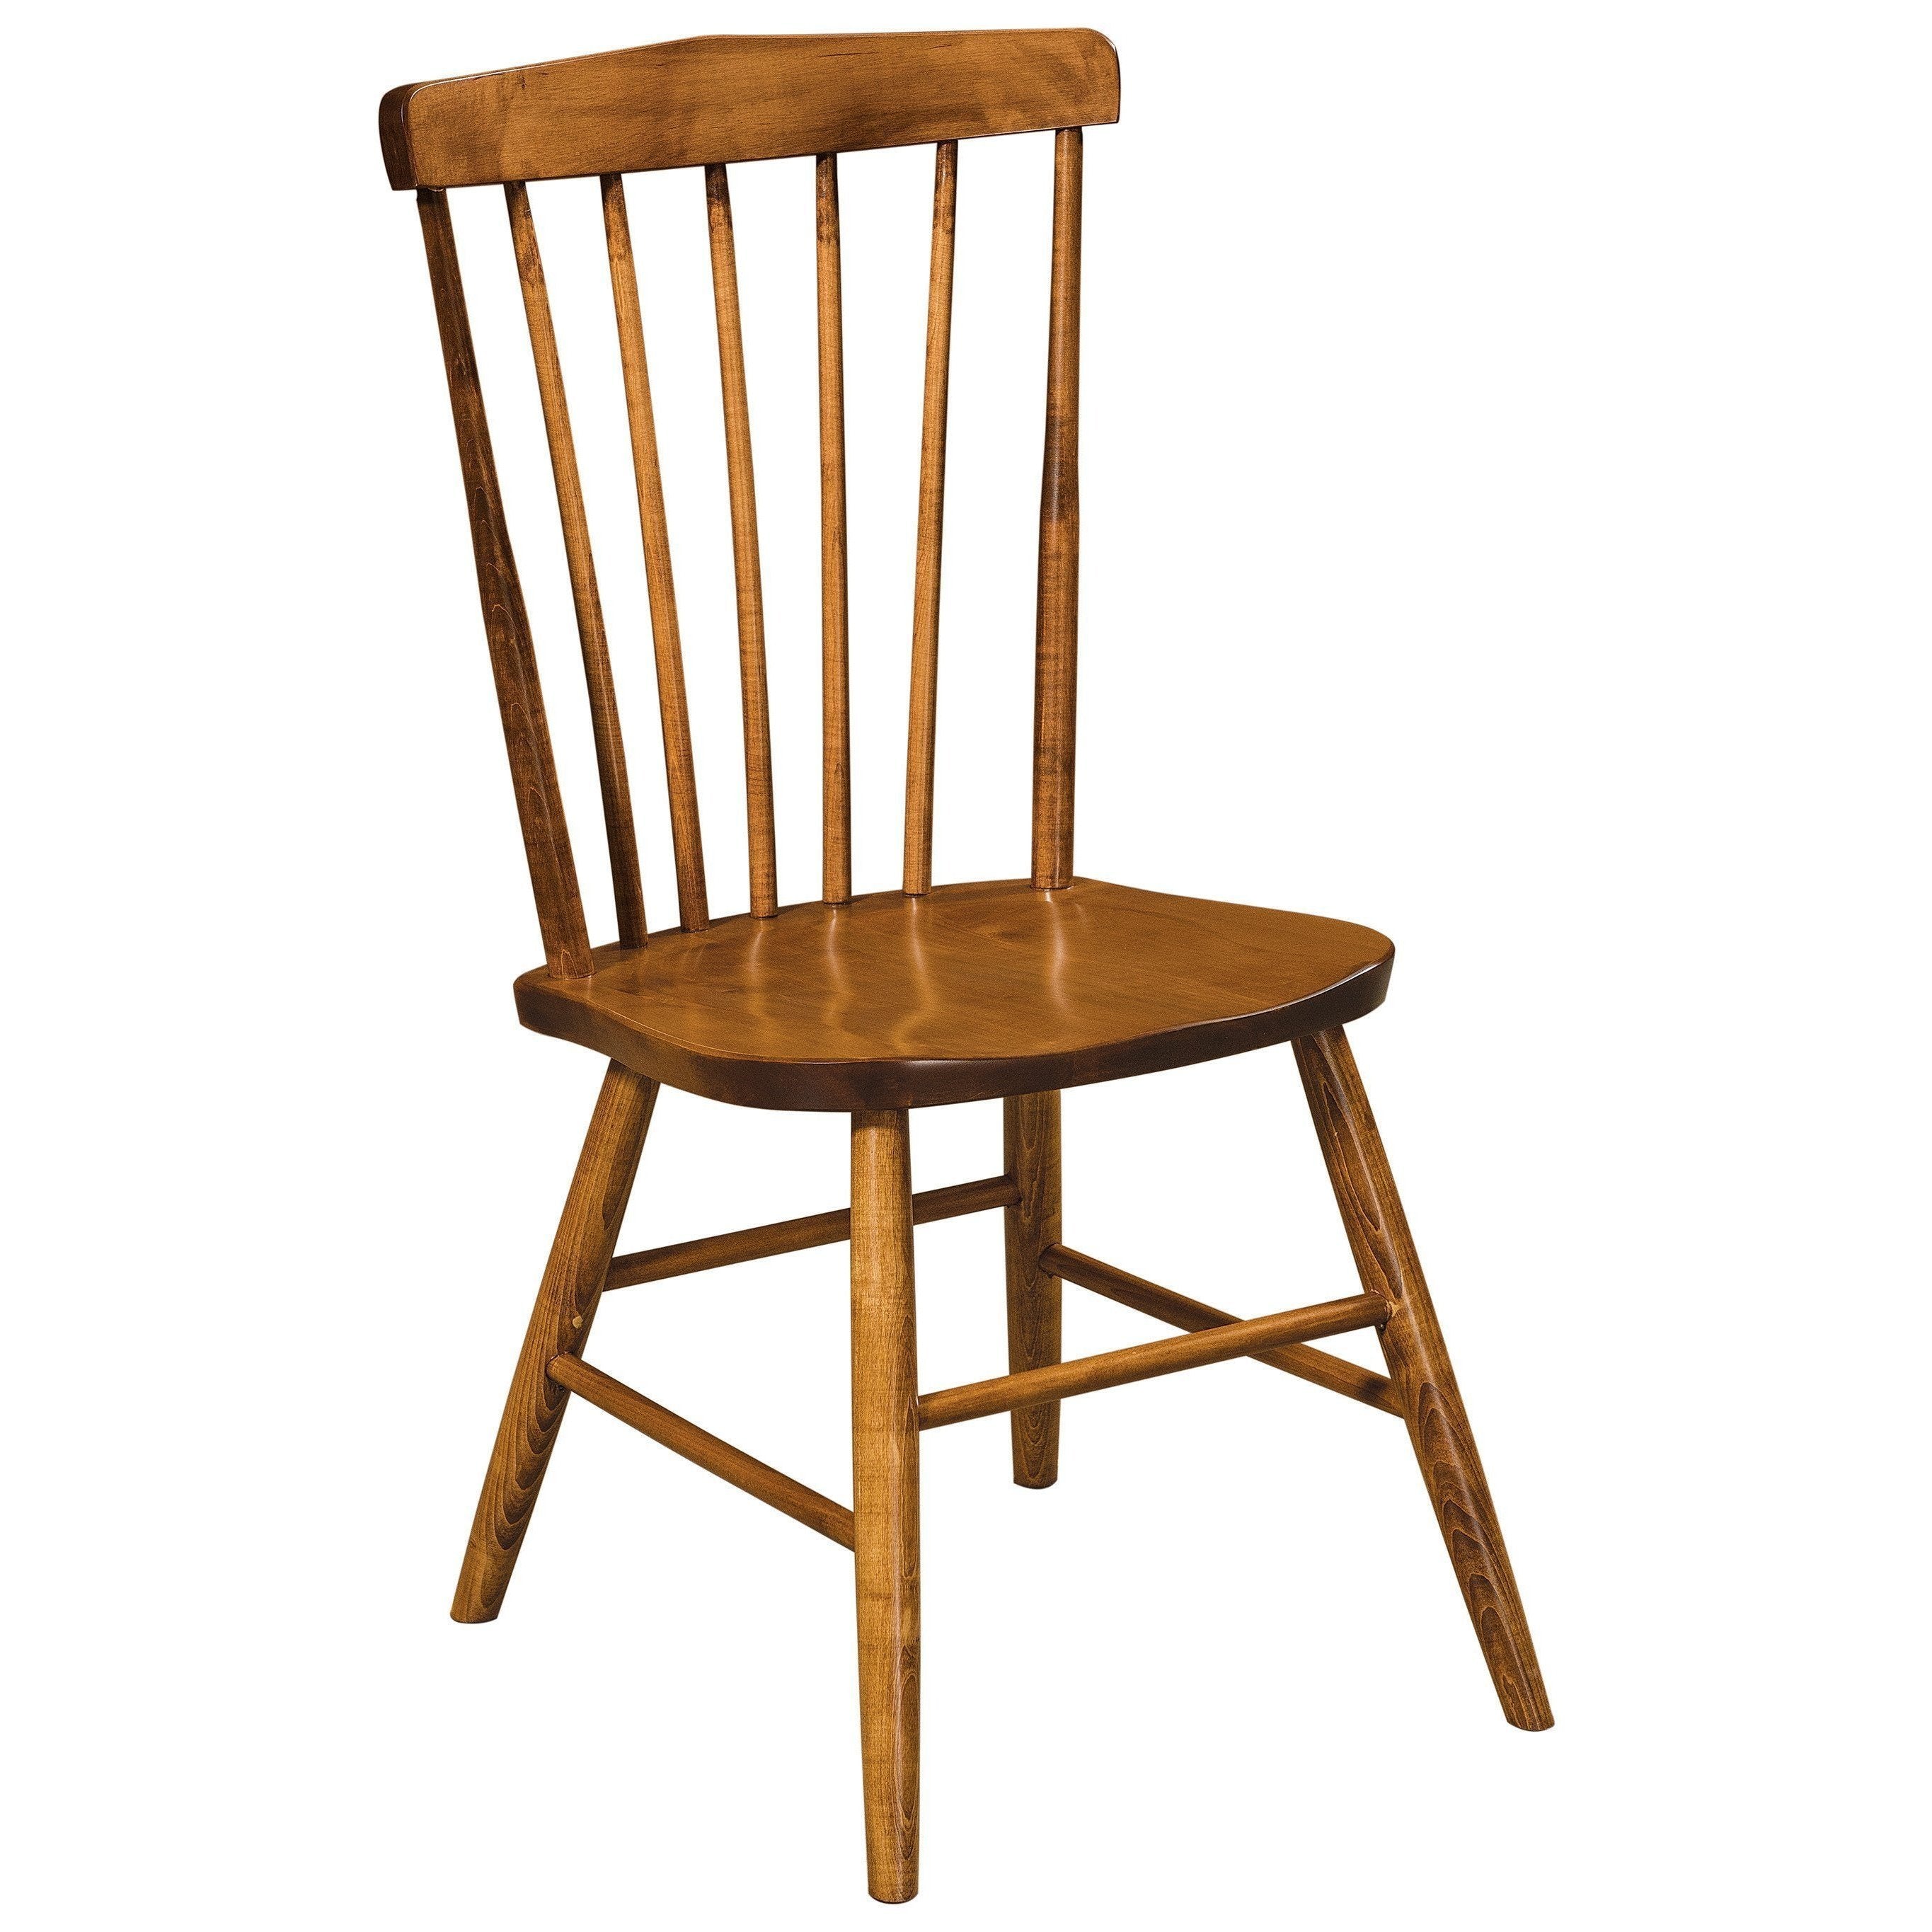 cantaberry-side-chair-260077.jpg